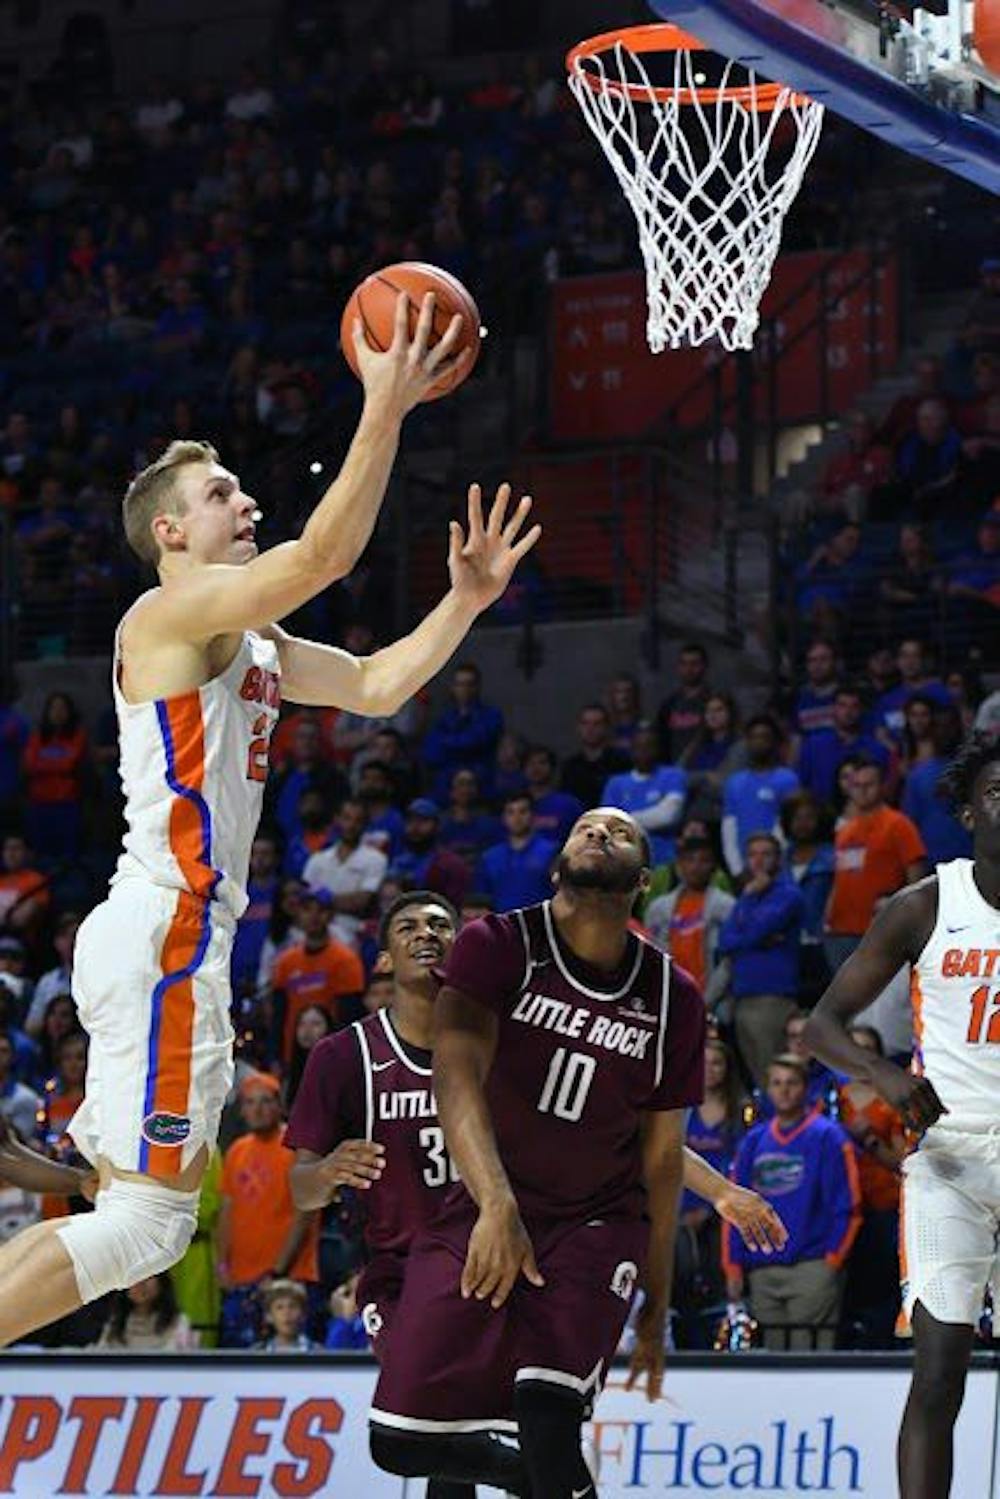 <p>UF guard Canyon Barry attempts a layup in Florida's 94-71 win over The University of Arkansas at Little Rock on Dec. 21 at the Stephen C. O'Connell Center.&nbsp;</p>